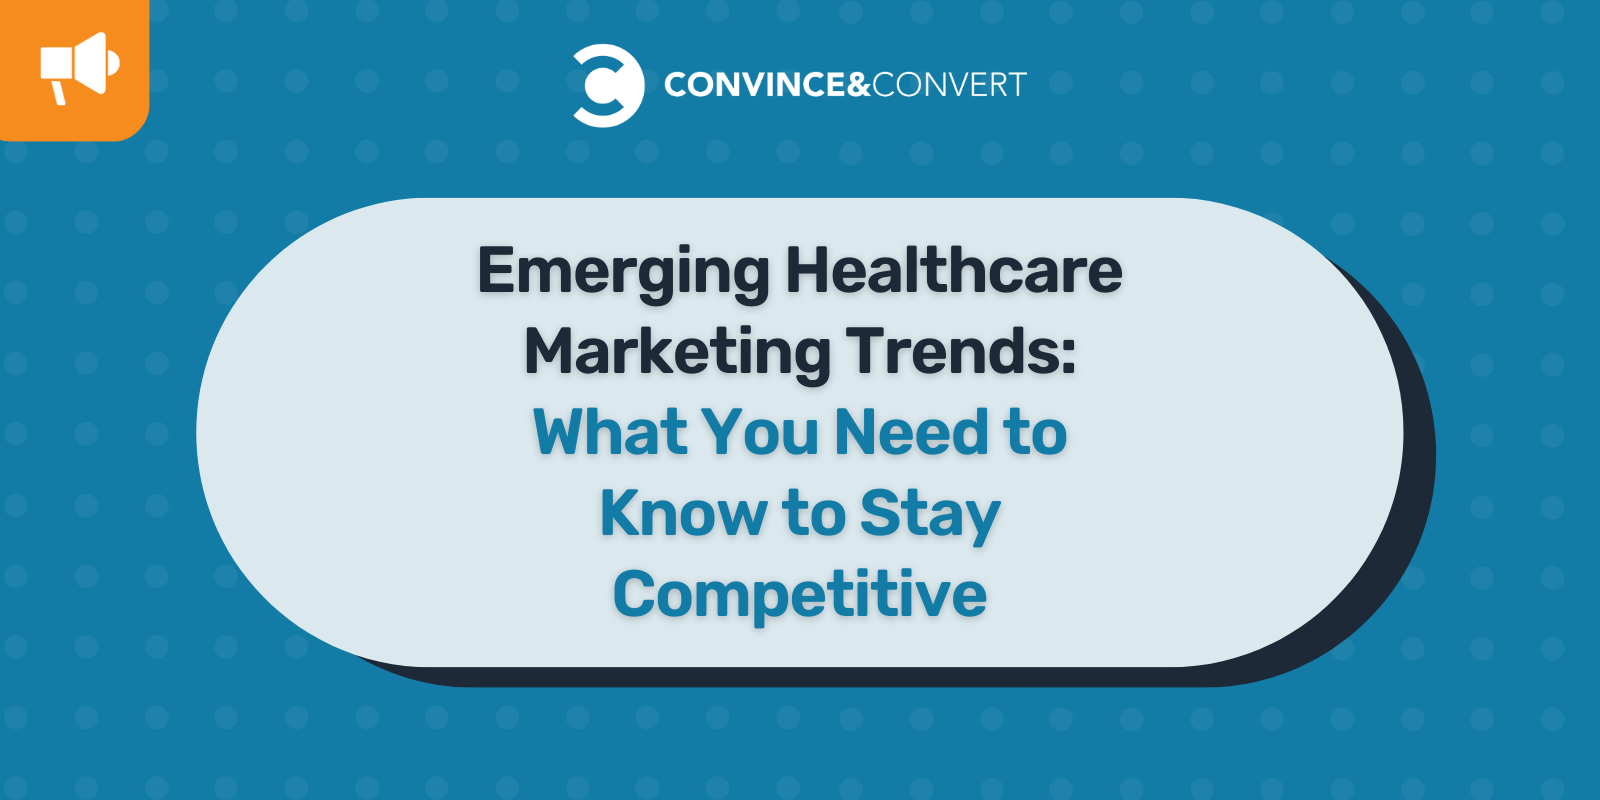 You are currently viewing Emerging Healthcare Marketing Trends: What You Need to Know to Stay Competitive